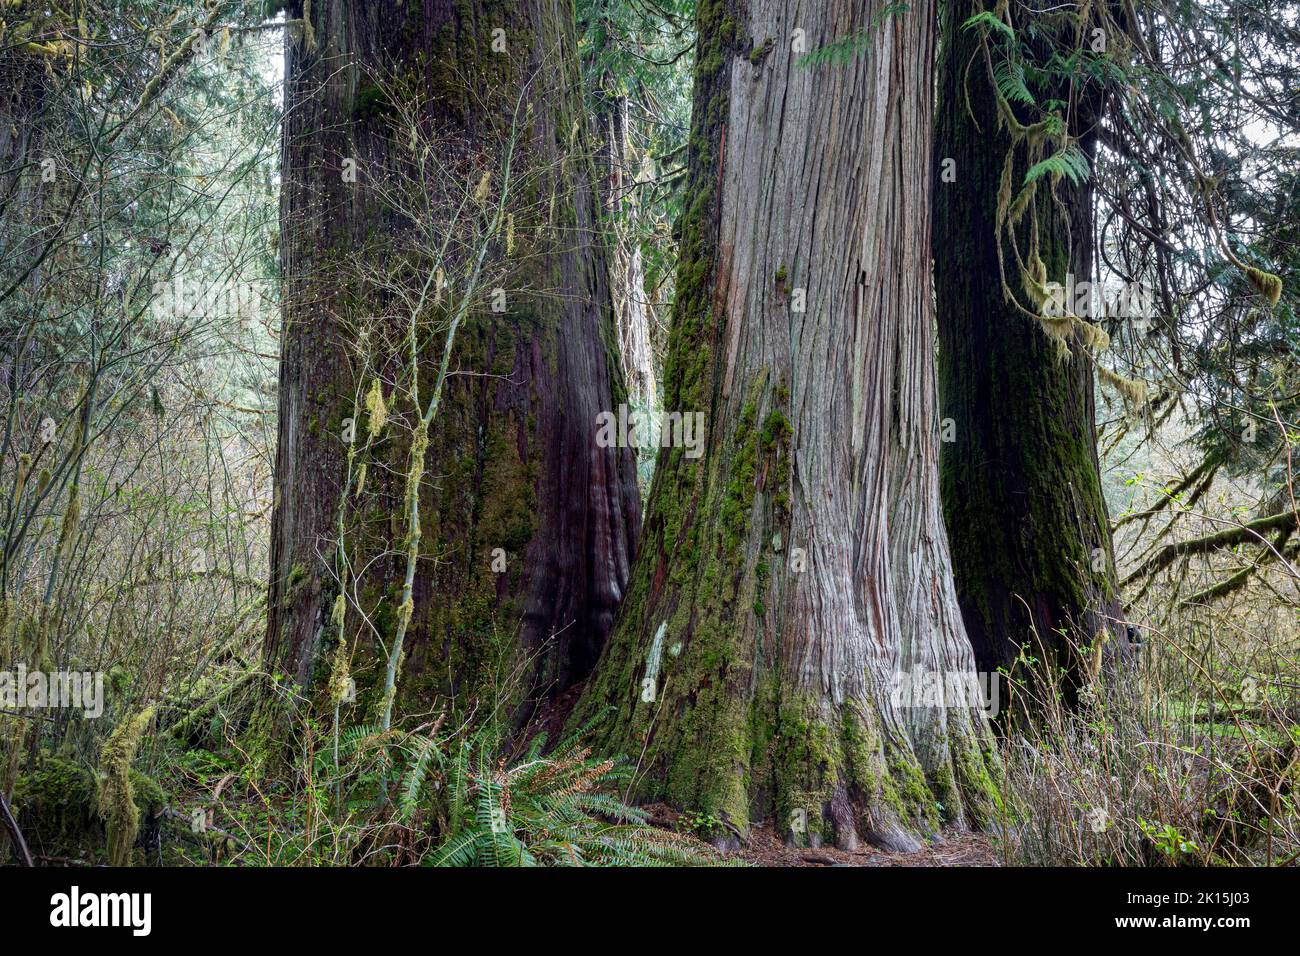 WA22032-00..WASHINGTON - Three large, old Western Red Cedar Trees viewed along the  Hoh River Trail in the Hoh Rain Forest of Olympic National Park. Stock Photo